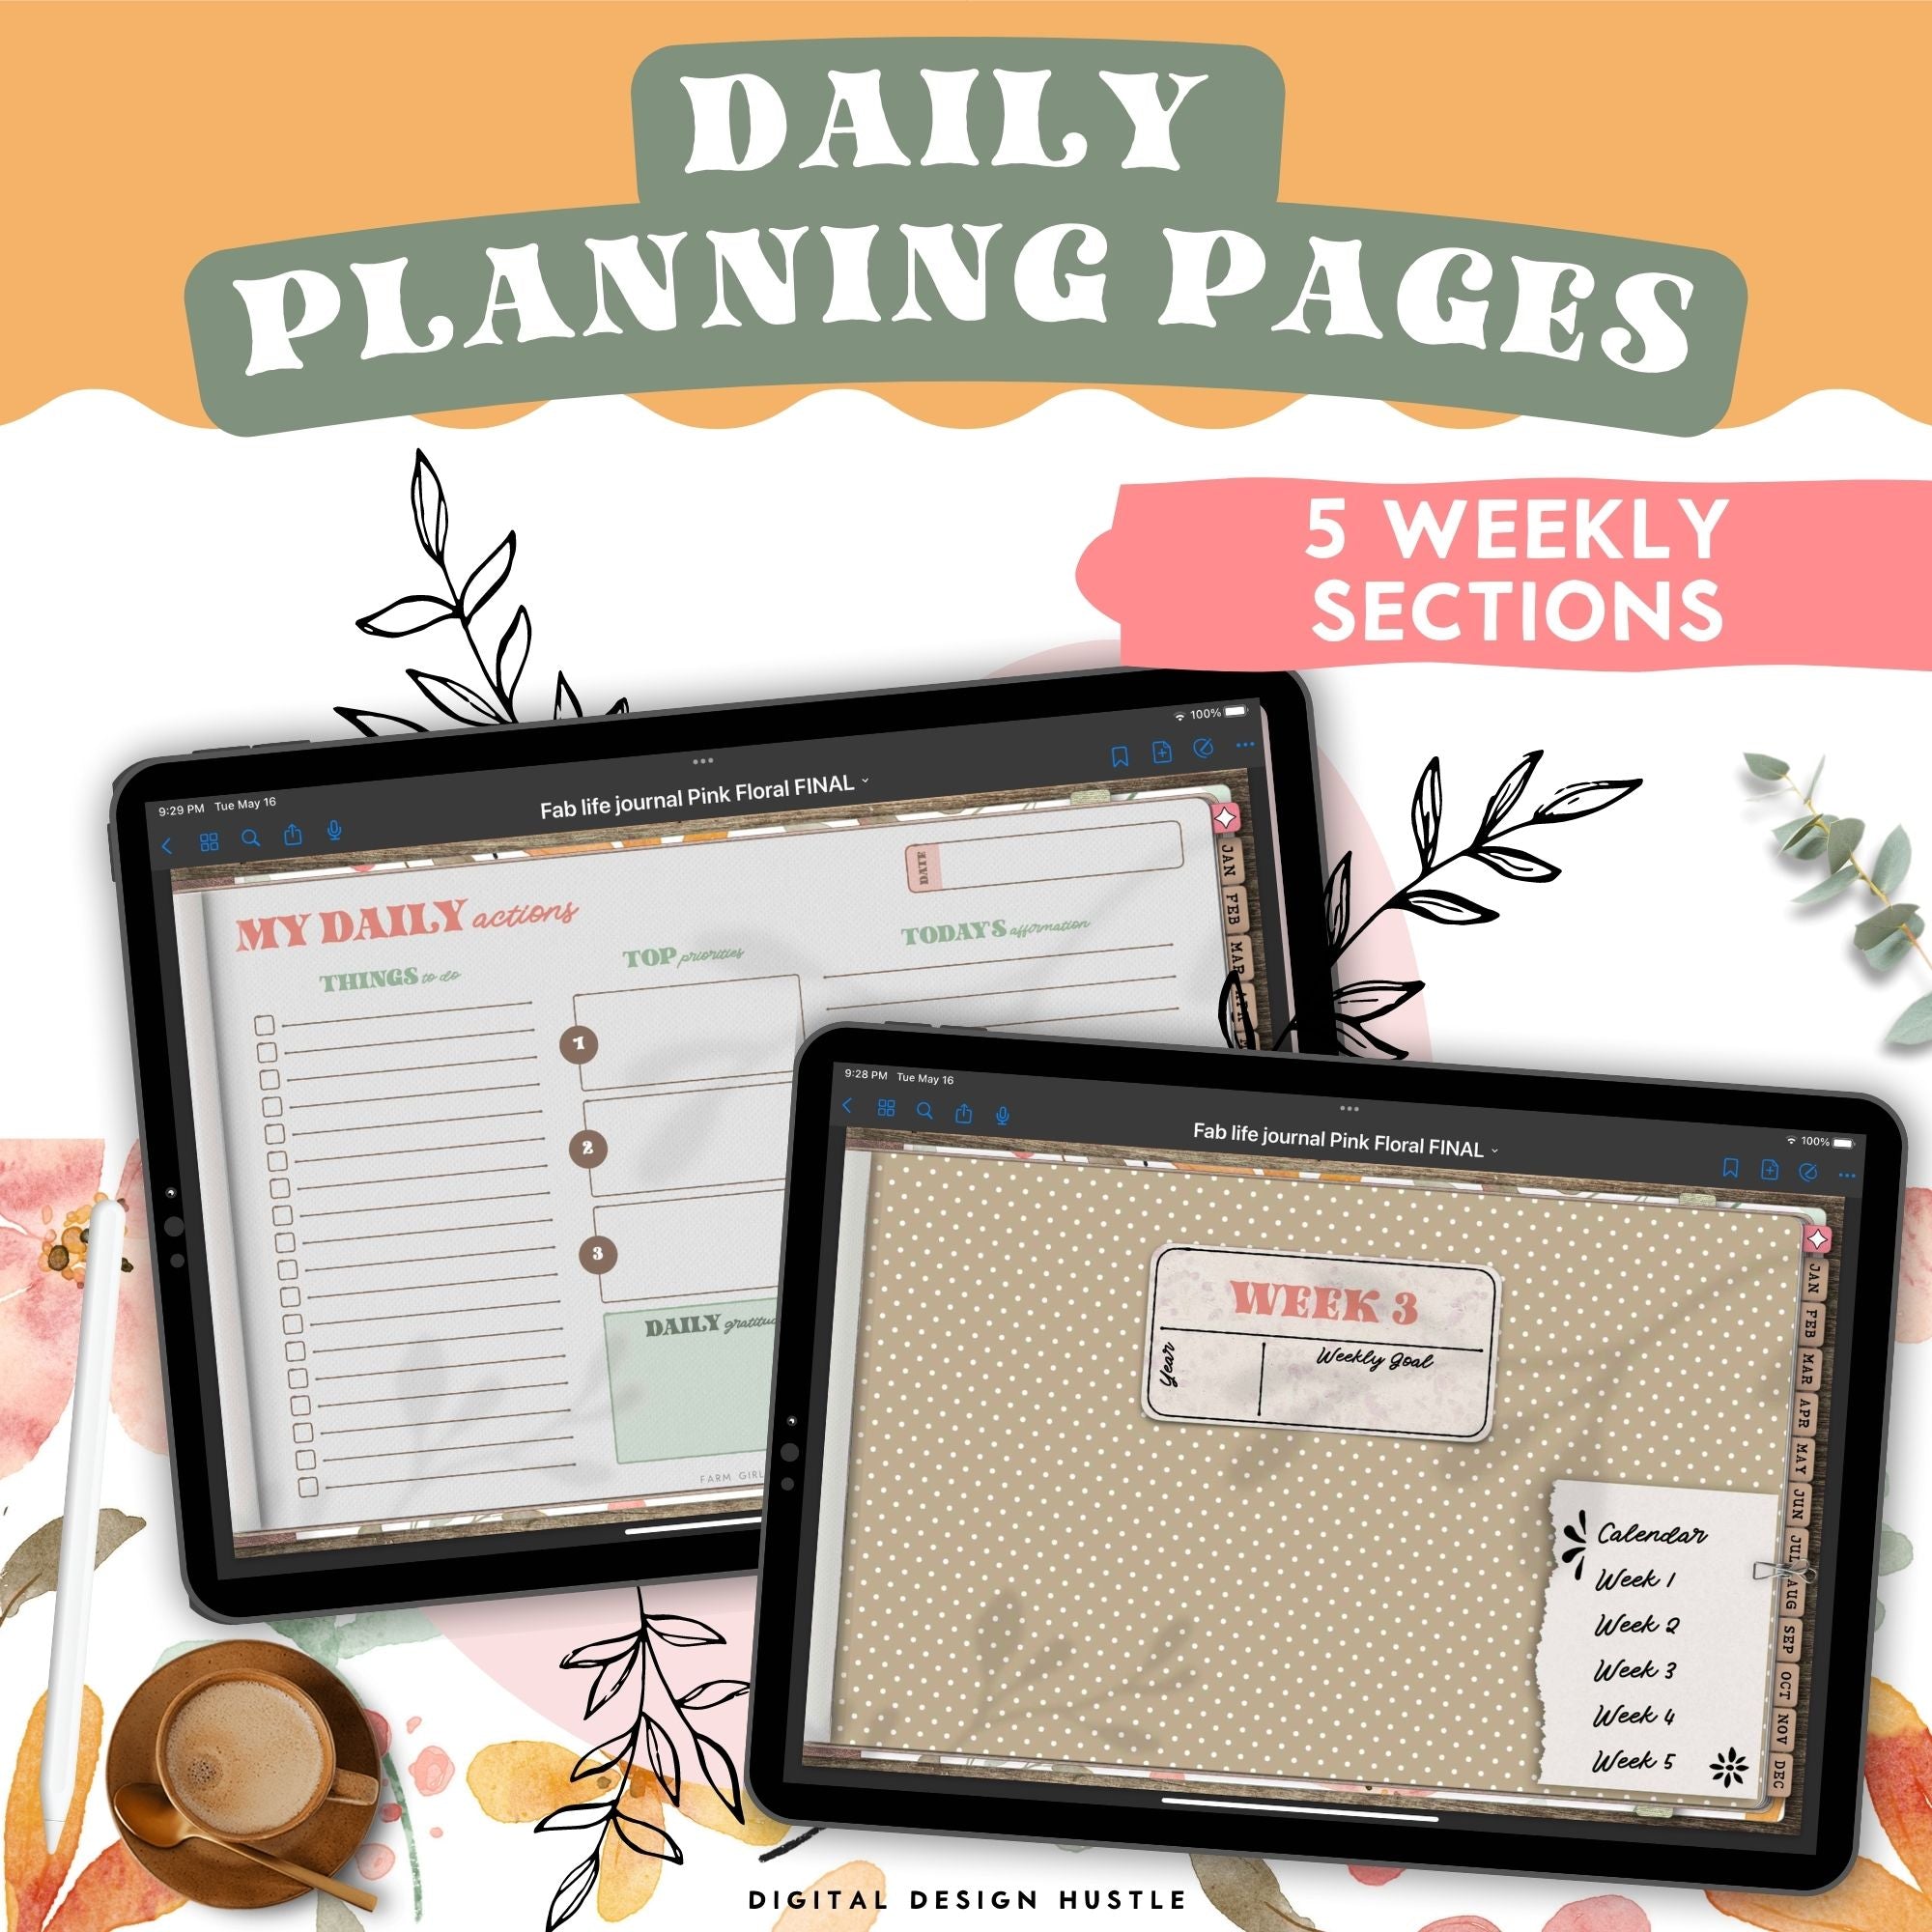 Take care of your mind, body and health with this floral digital gratitude journal. Use this beautifully designed planner to record and take note of your mental health. This self-care planner has 1348 hyperlinked pages for monthly and daily journaling. Track your gratitude for each day of the year.